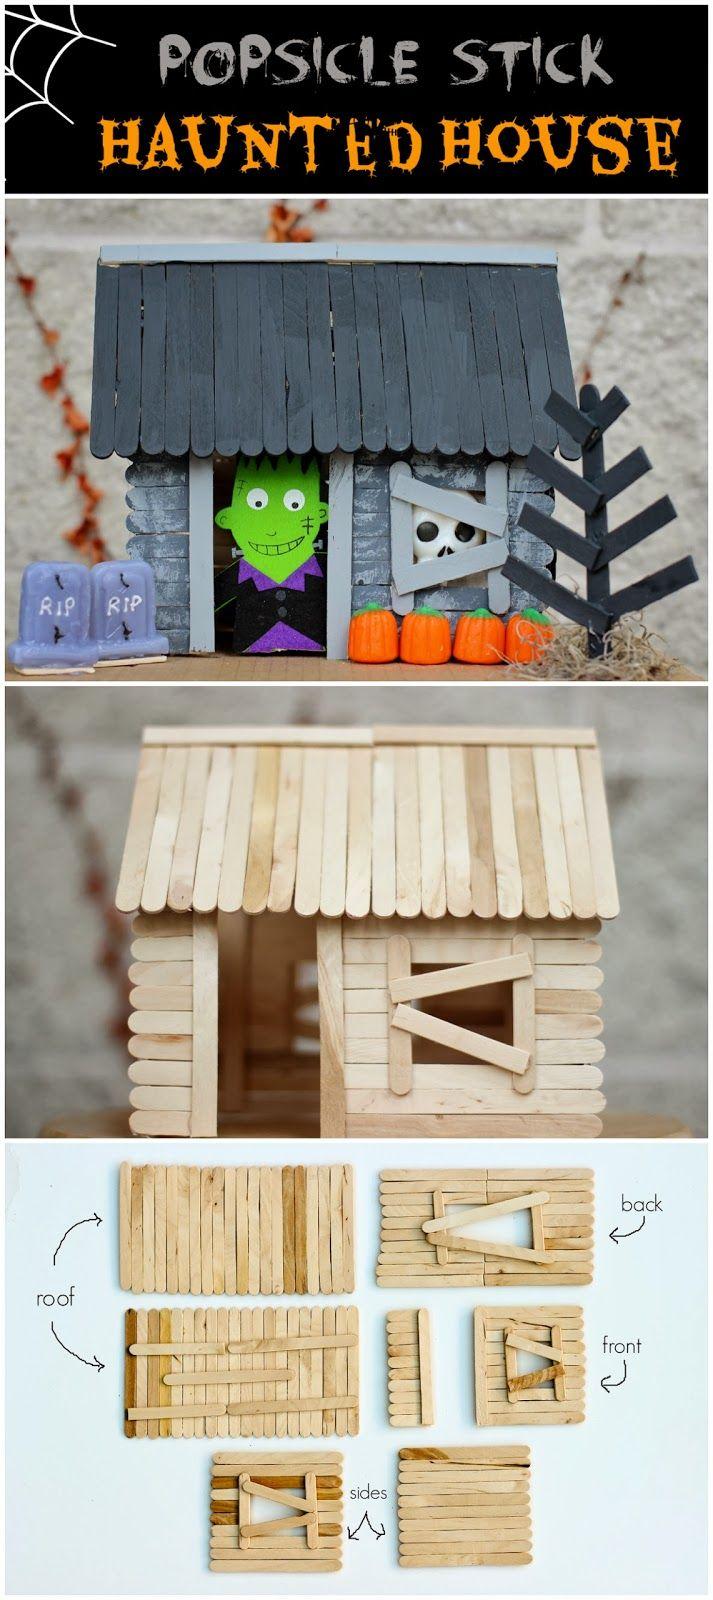 Mariage - HAPPILY EVERLY AFTER: Popsicle Stick Haunted House